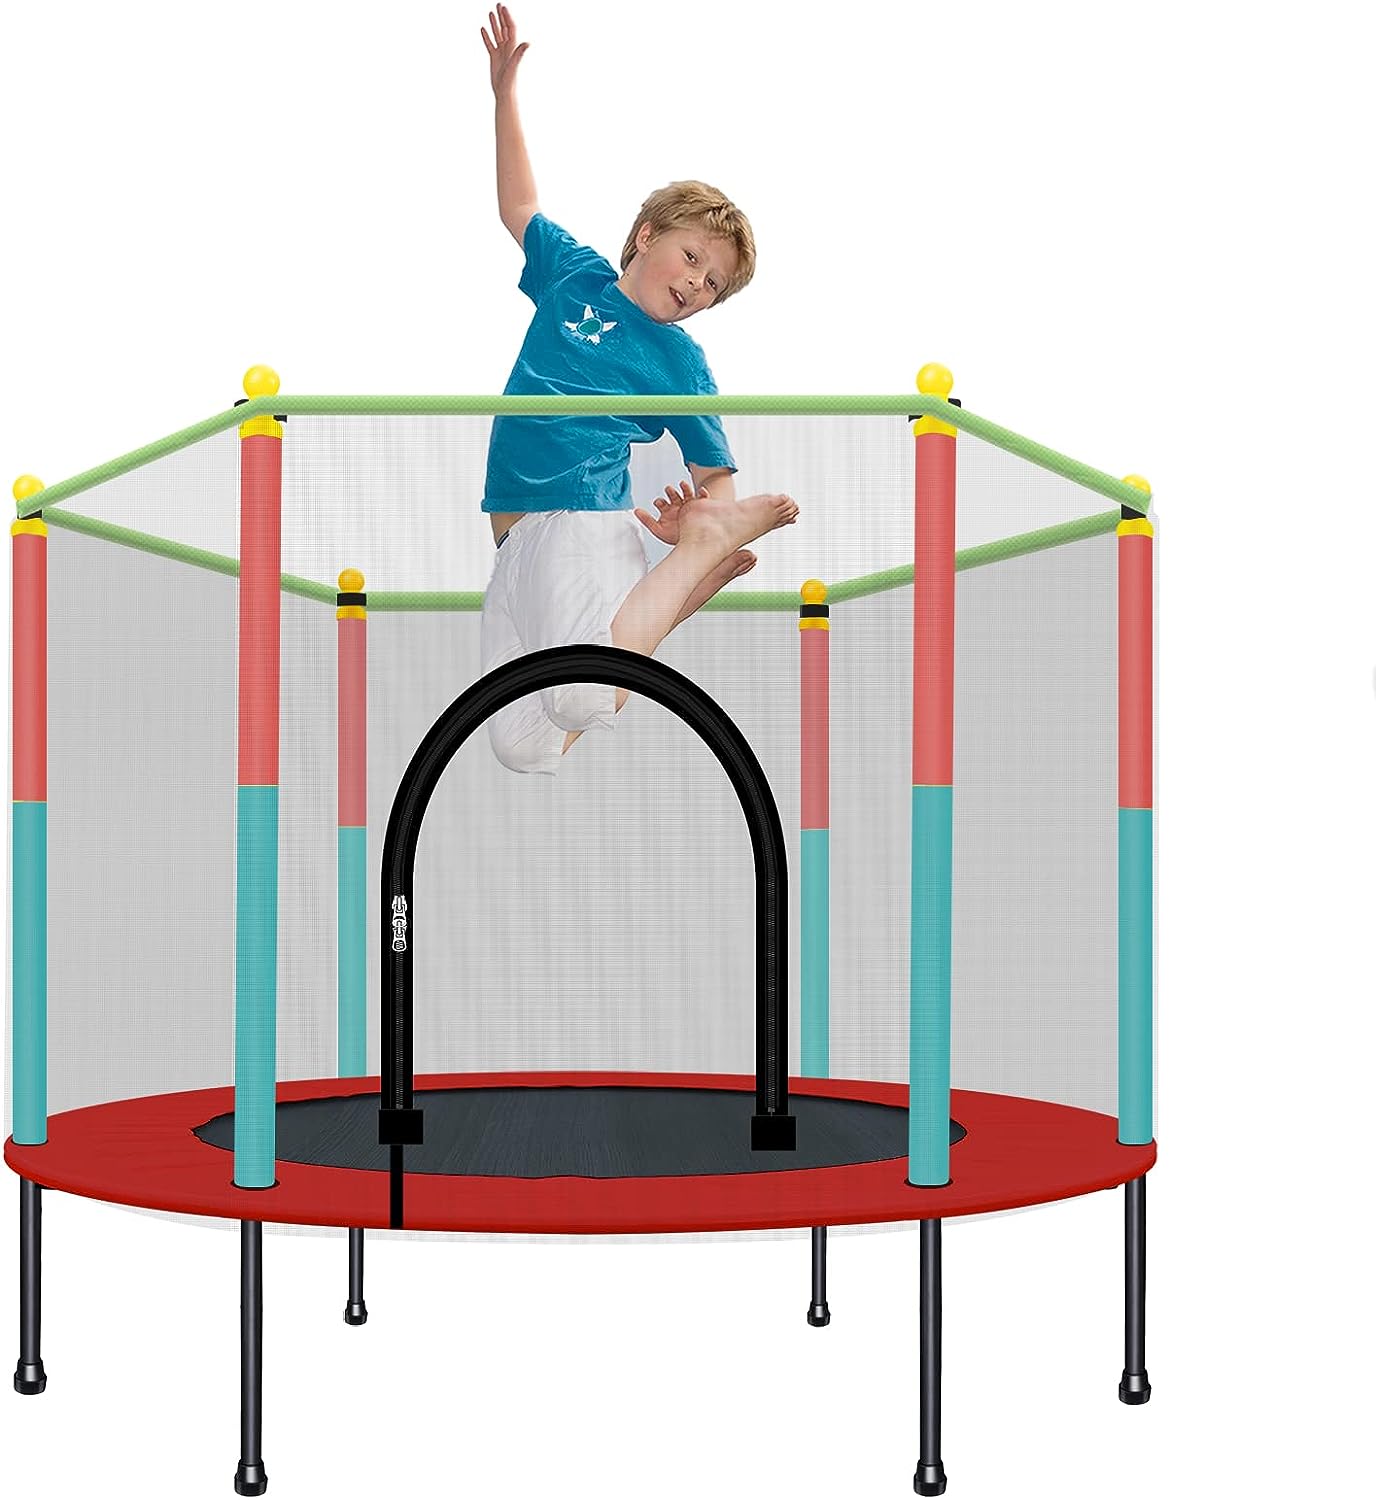 Kids Trampoline with Safety Enclosure Net - 5FT Trampoline for Toddlers Indoor and Outdoor - Parent-Child Interactive Game Fitness Trampoline Toy